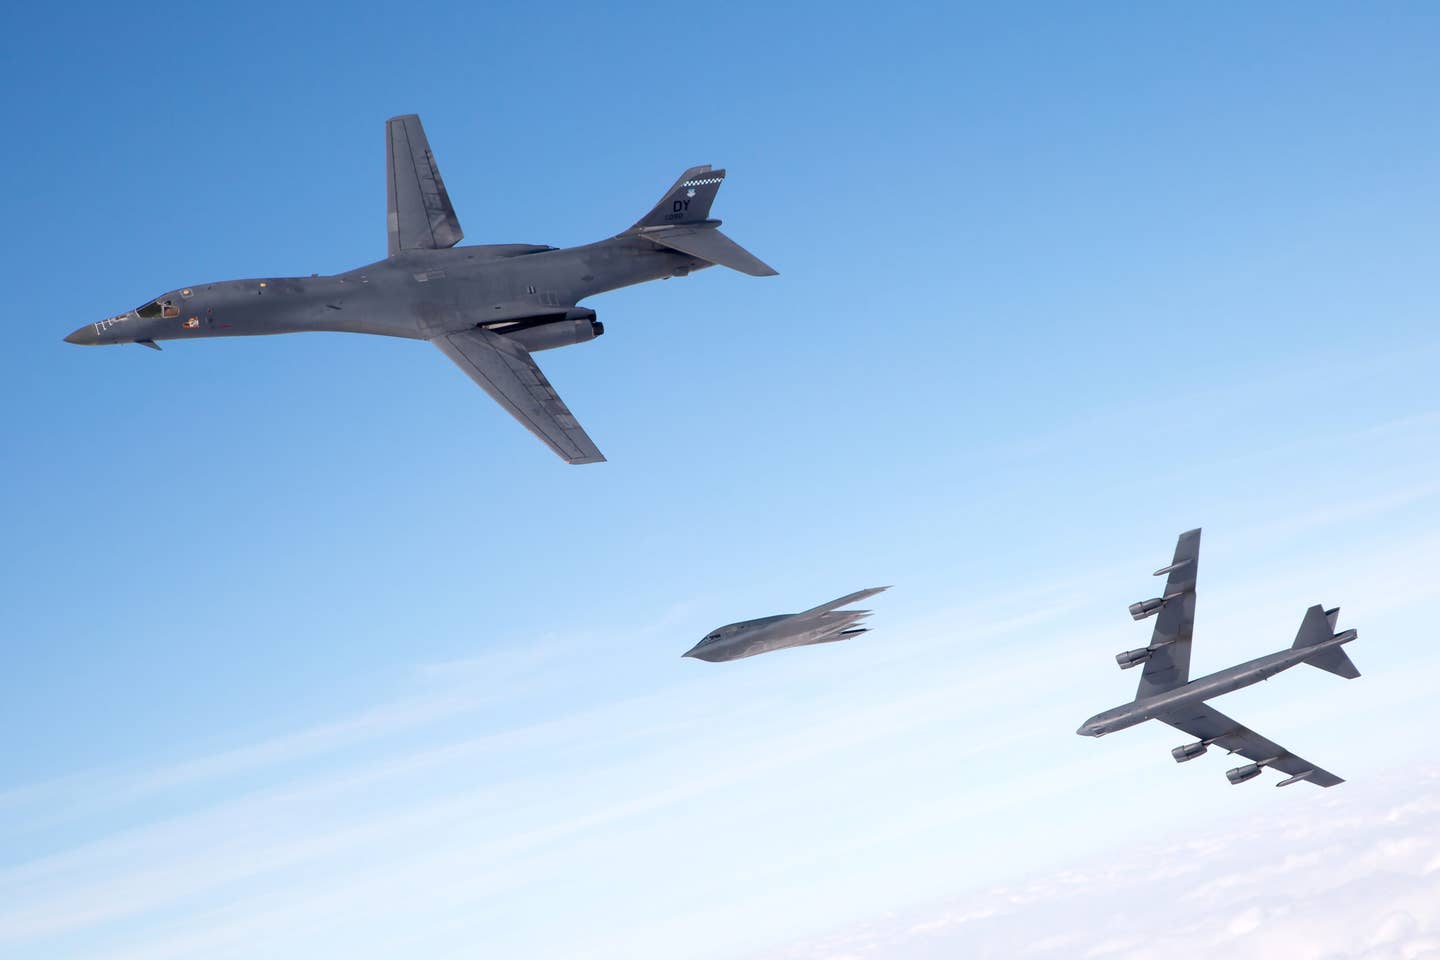 The swing-wing B-1 still has a major place in the U.S. bomber force although it lacks nuclear weapons delivery capability. It is slated to be replaced by the dual-role B-21 in the coming decade. <em>U.S. Air Force photo courtesy Sagar Pathak</em>